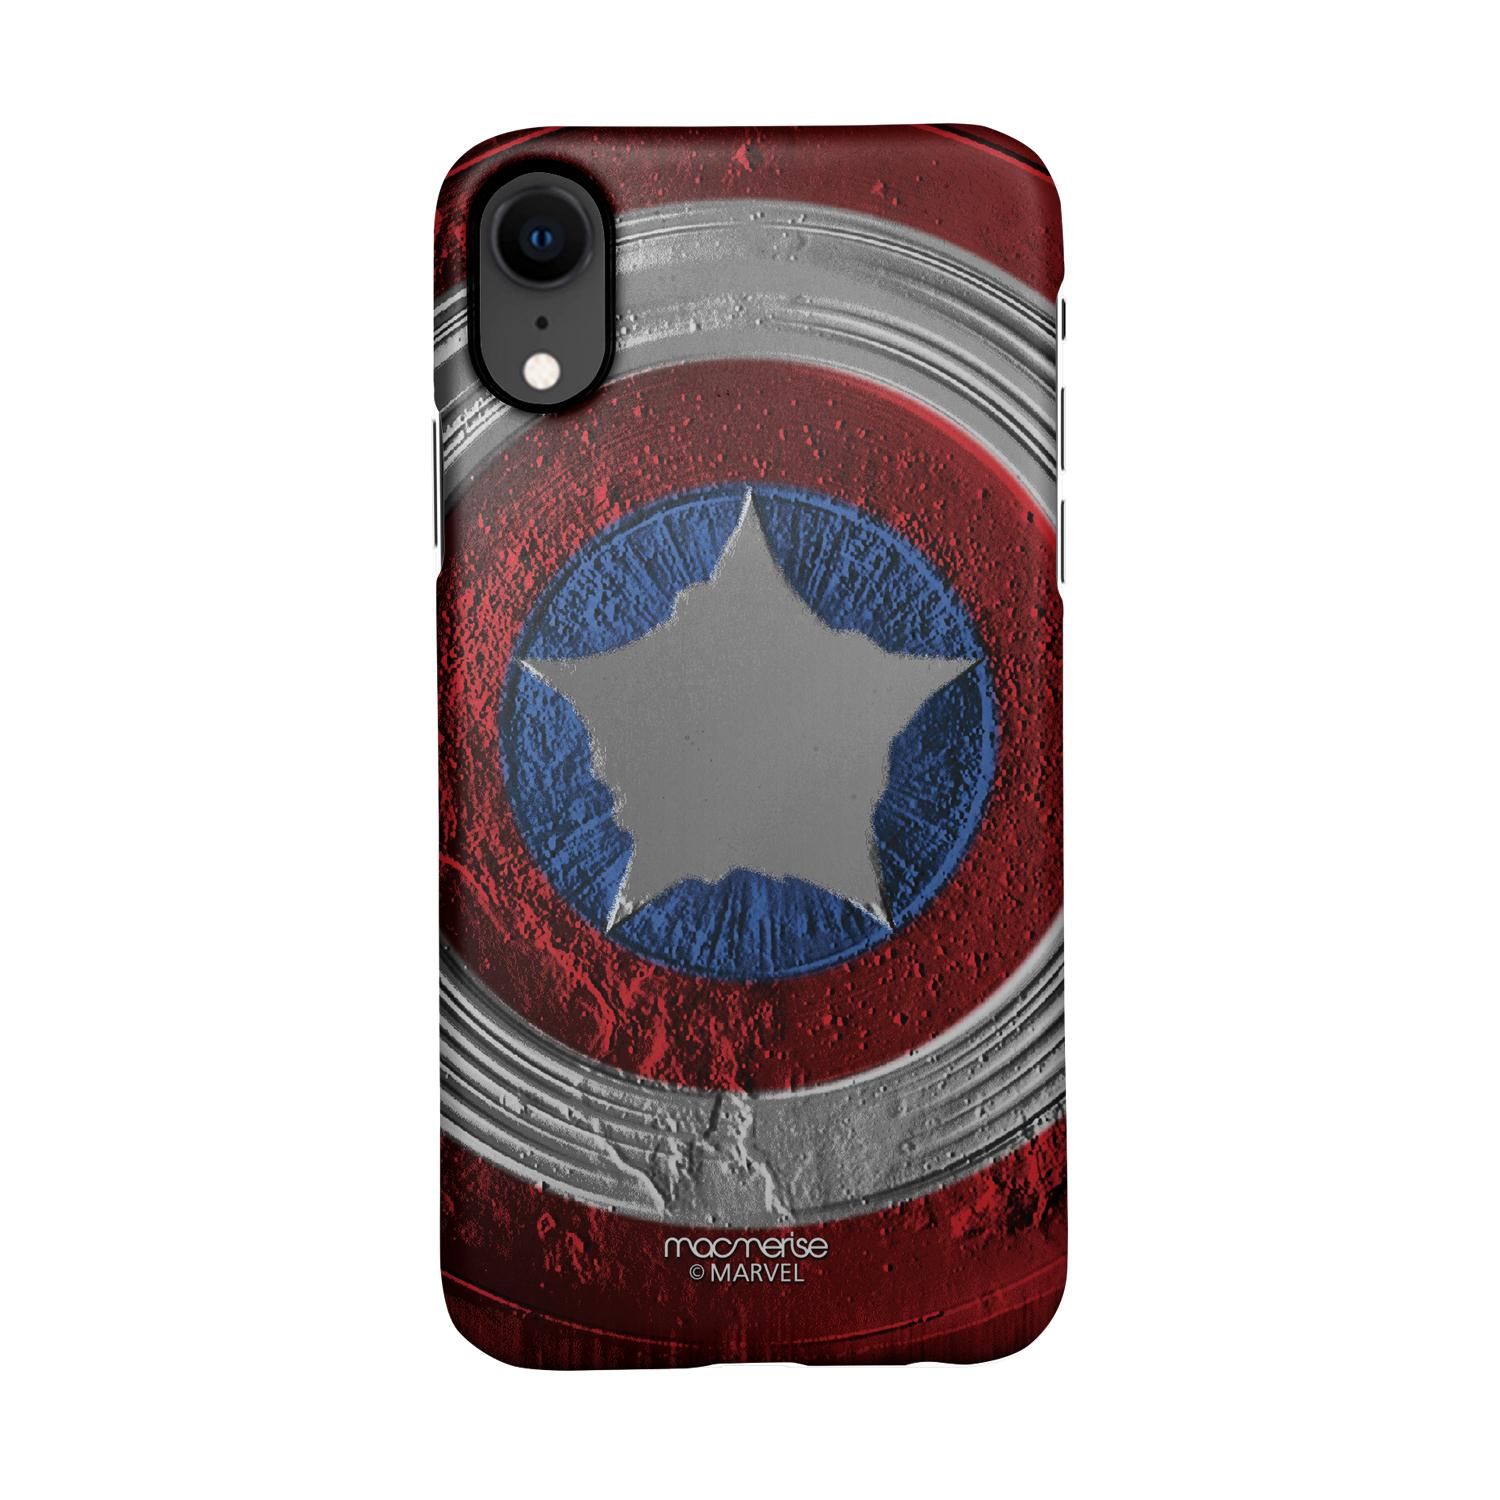 Buy Stoned Shield - Sleek Phone Case for iPhone XR Online